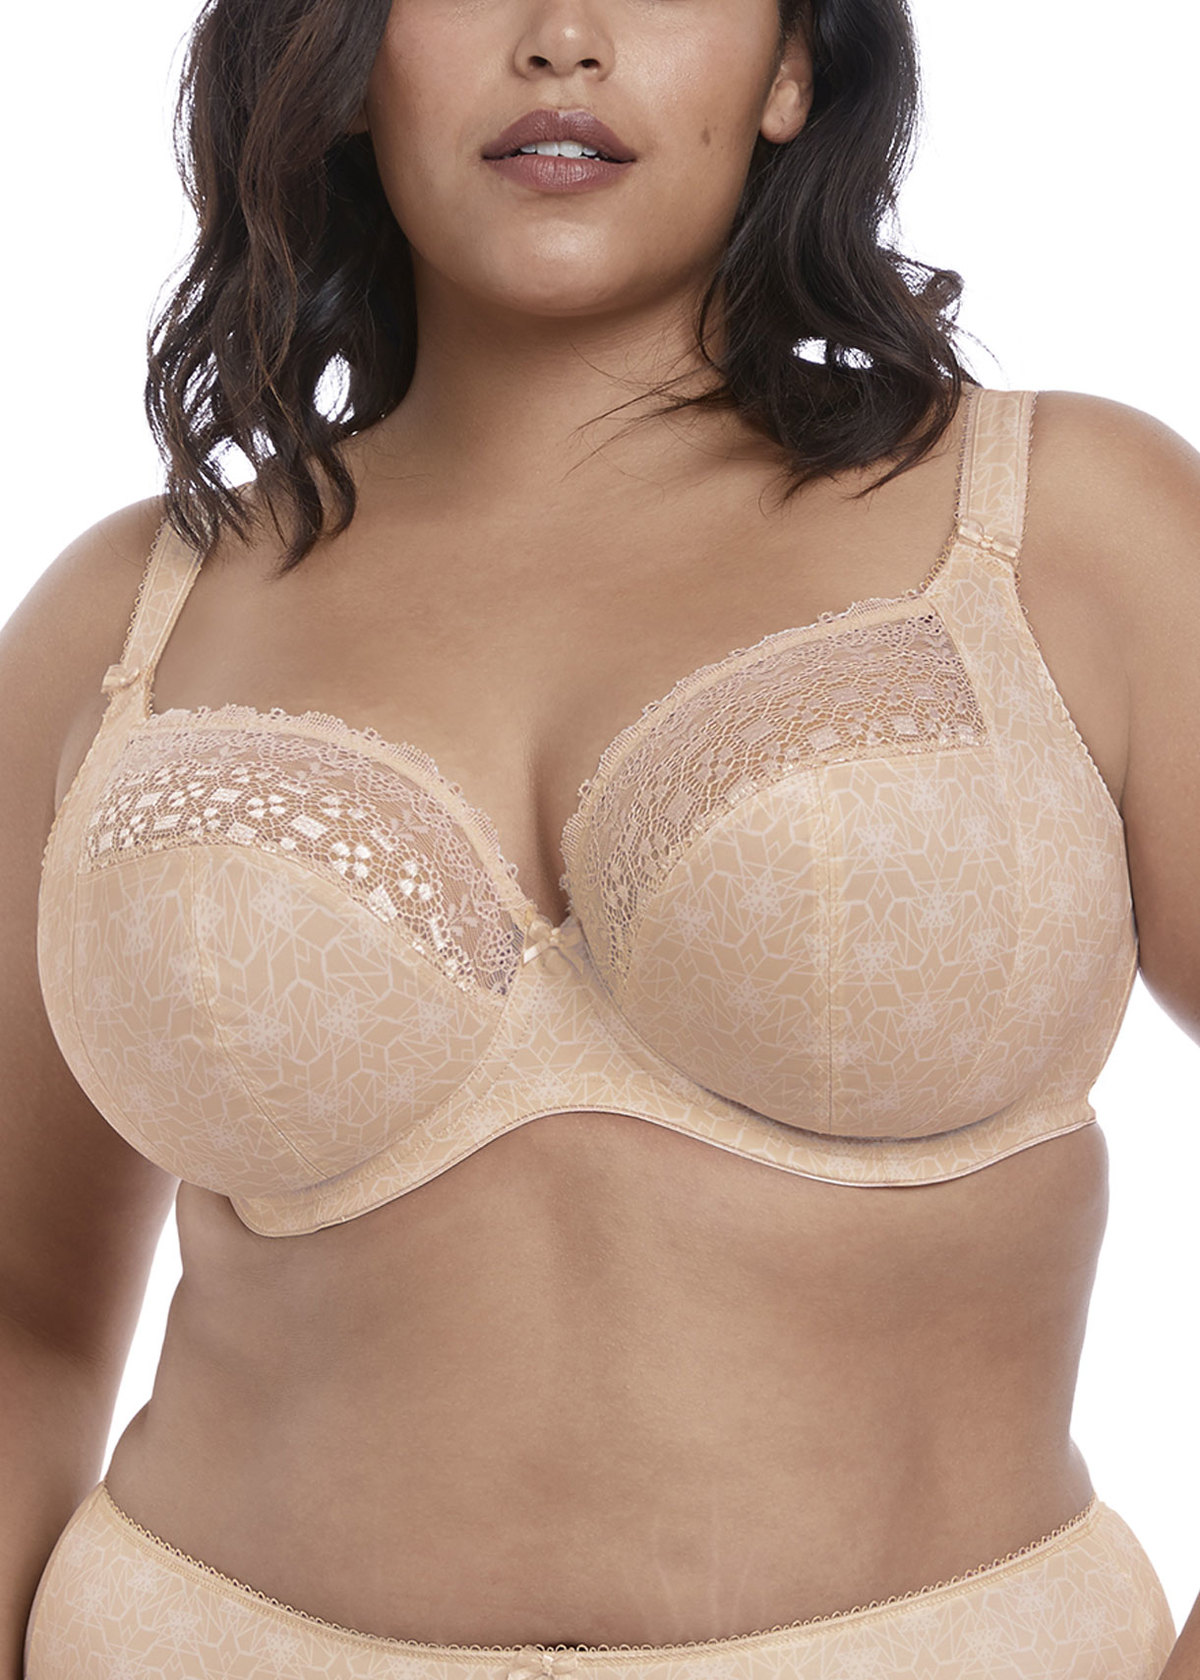 Centurion Mall - Find your perfect fit with free bra fittings at